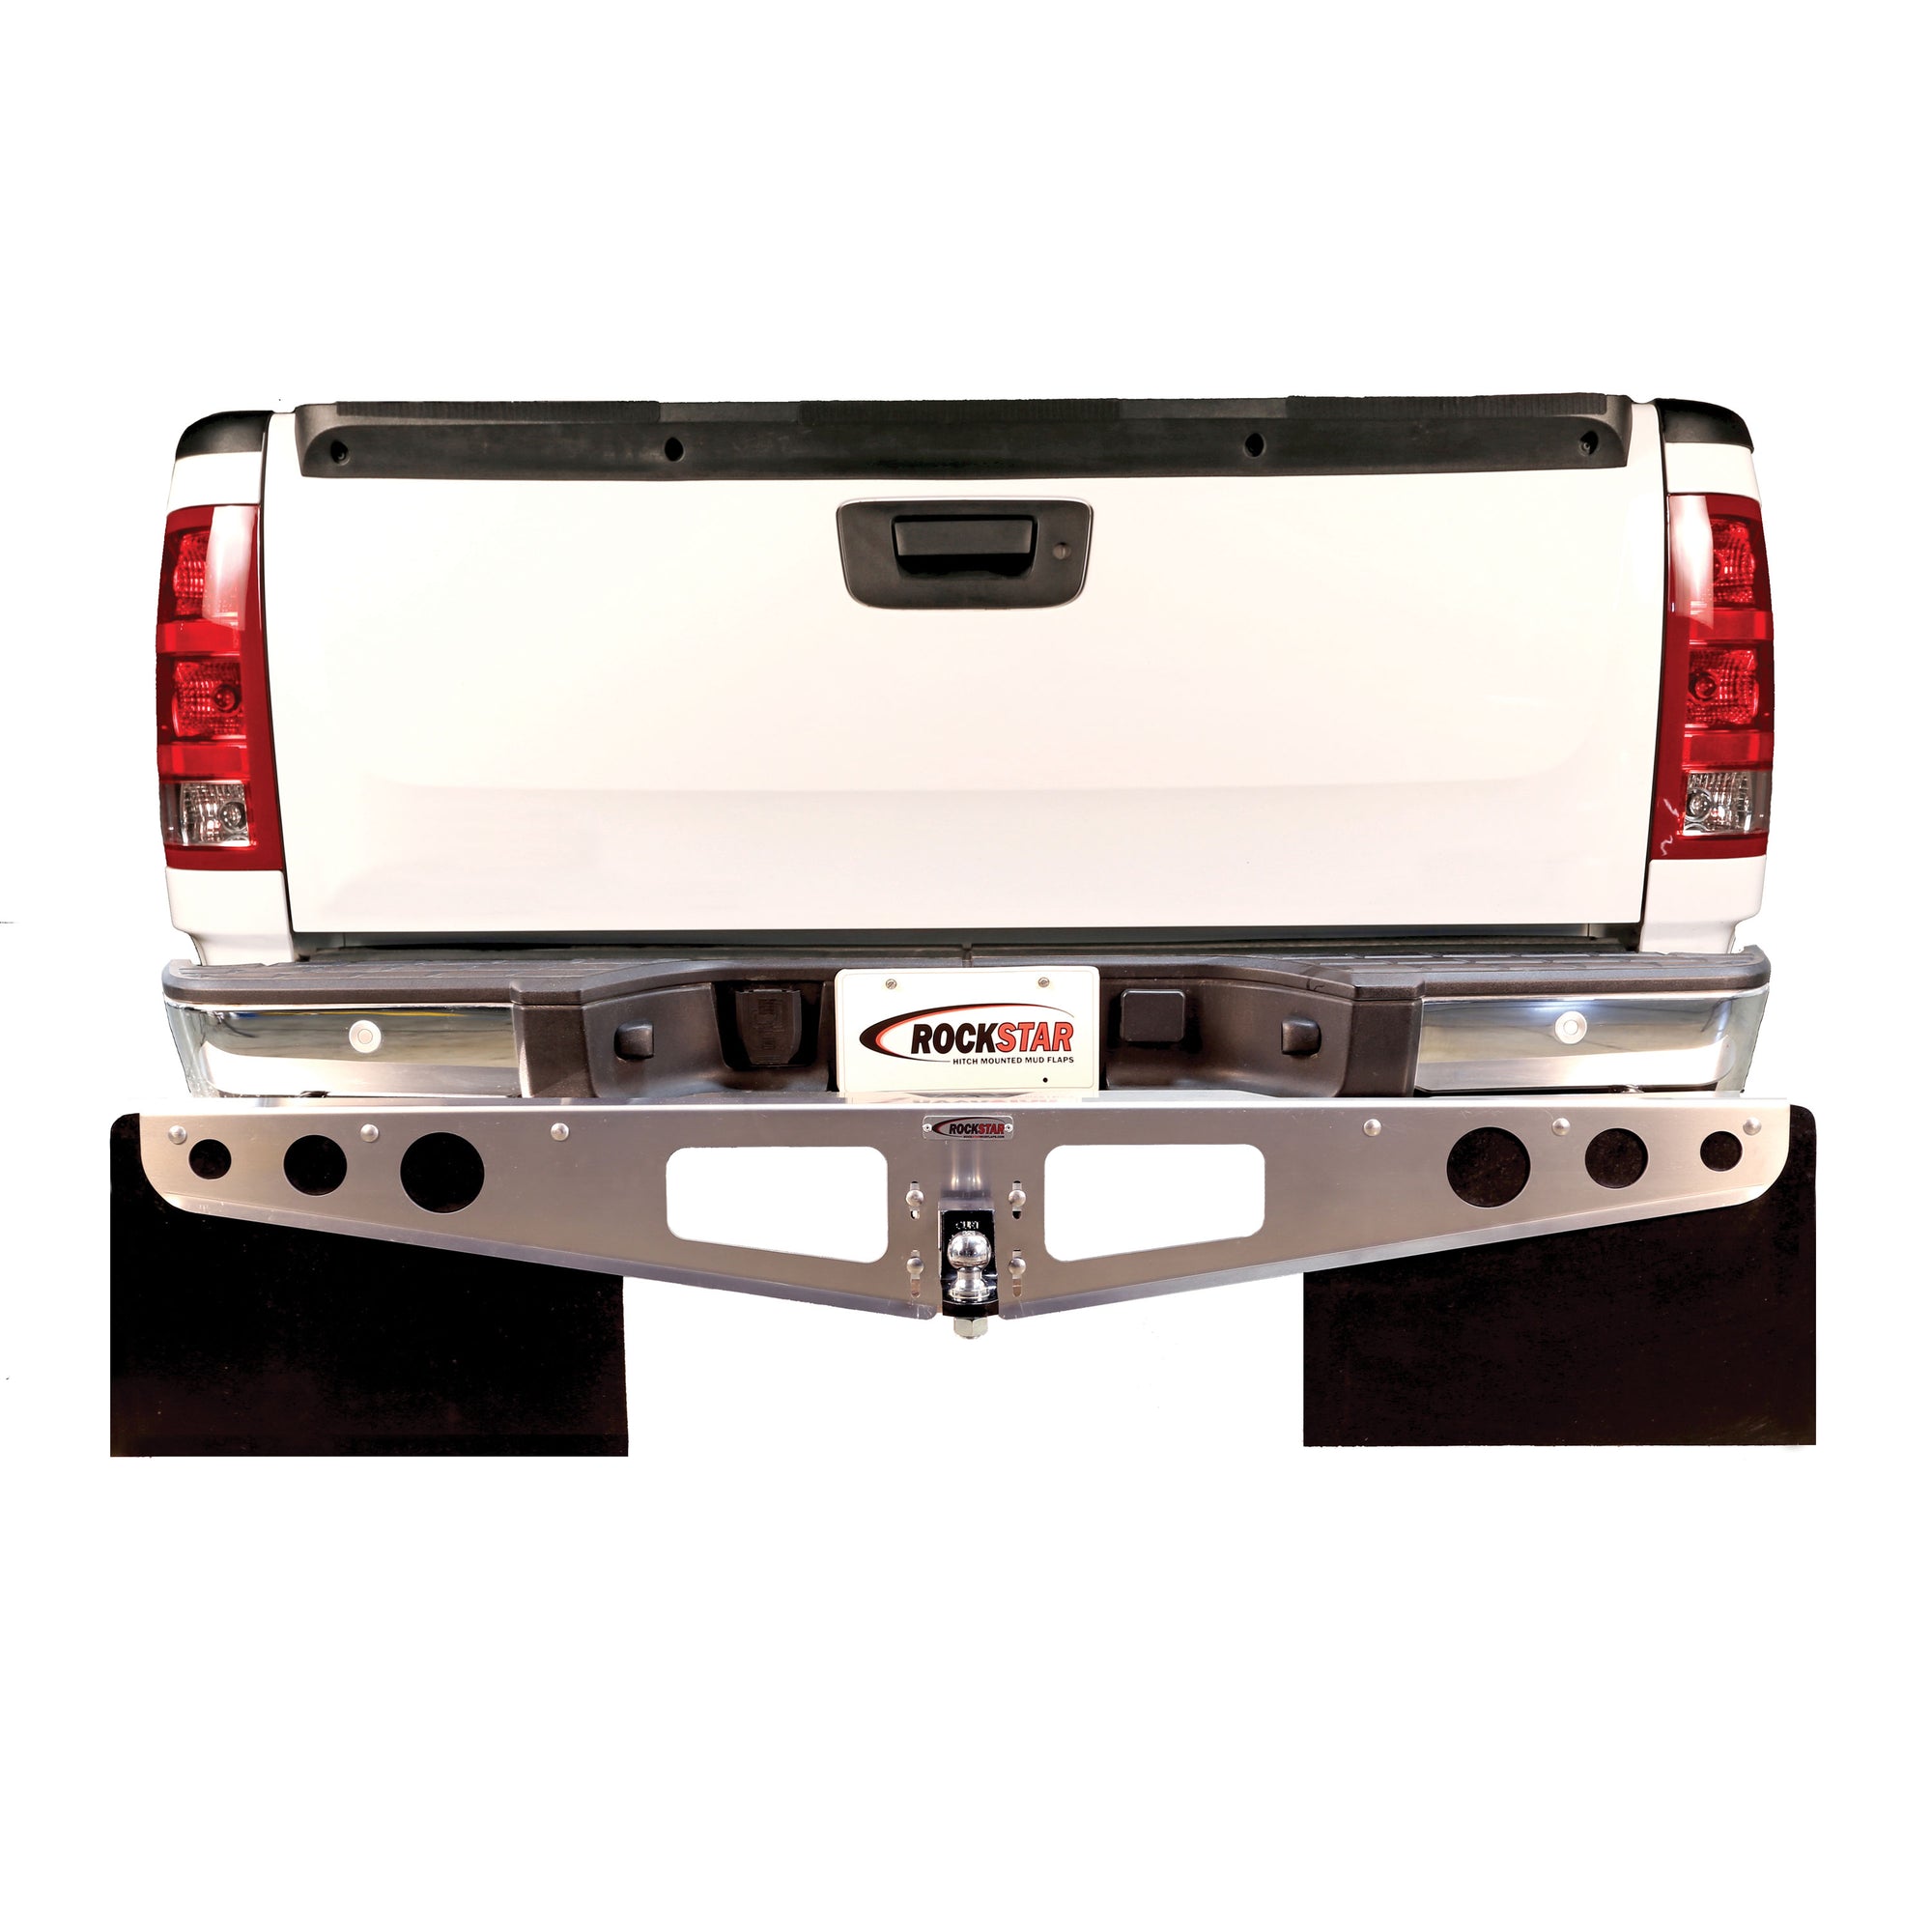 Agri-Cover A1040031 RockStar Hitch Mounted Mud Flaps for Dodge RAM (2009-2013) Trim to Fit